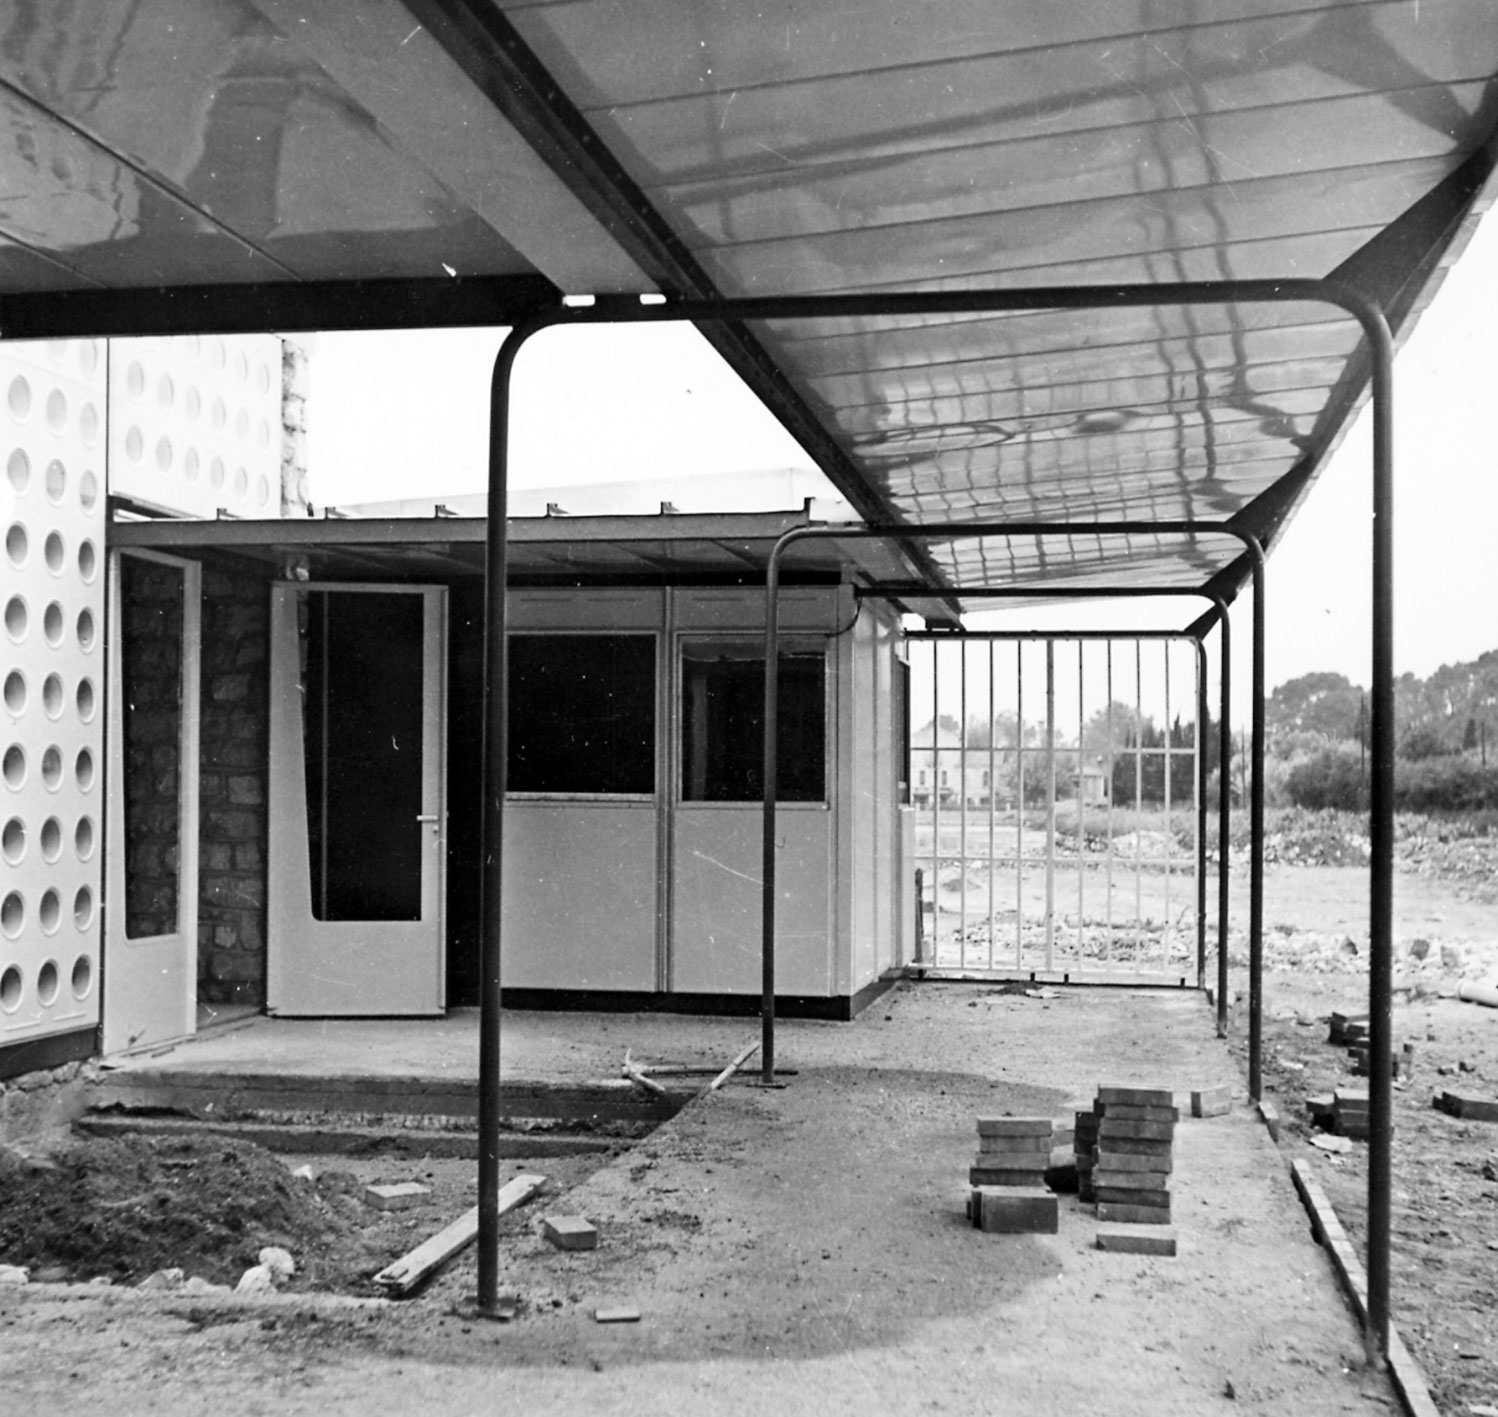 Ferrière kindergarten, Martigues, 1950–1953 (A. Arati, M. Boyer and C. Lestrade, architects). View of the building site.